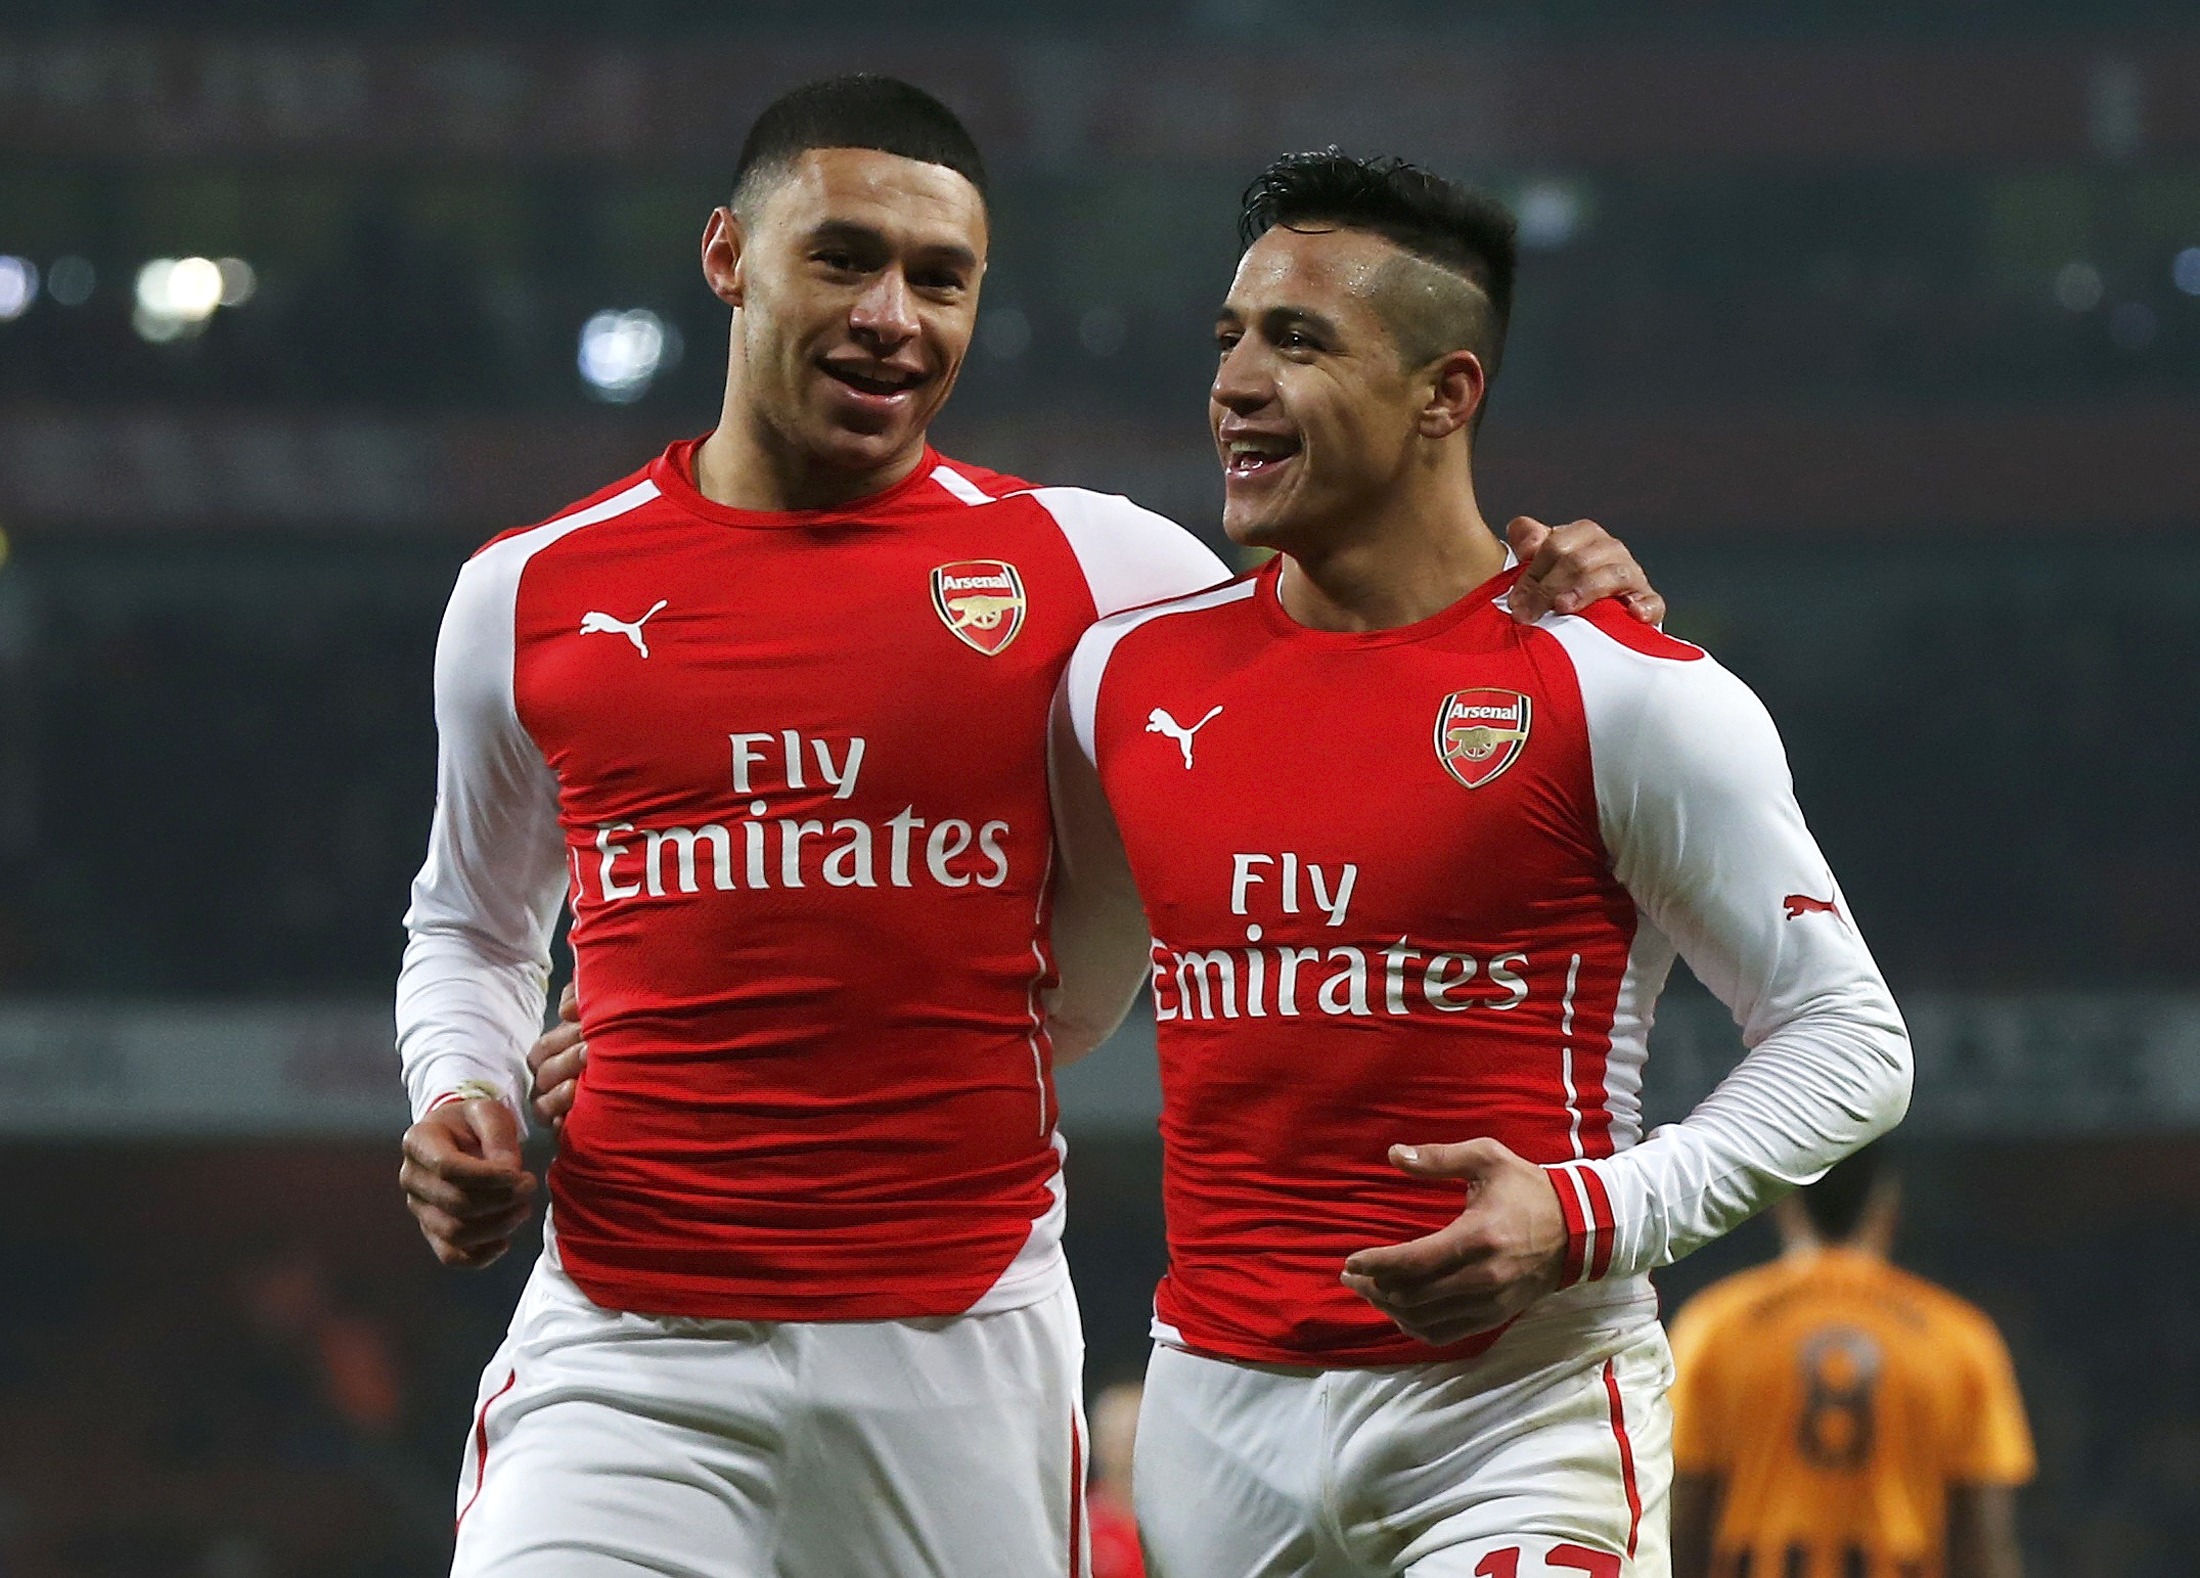 Alexis Sanchez of Arsenal celebrates with team mate Alex Oxlade-Chamberlain after scoring his team's second goal against Hull during their FA Cup third round soccer match at the Emirates Stadium in London